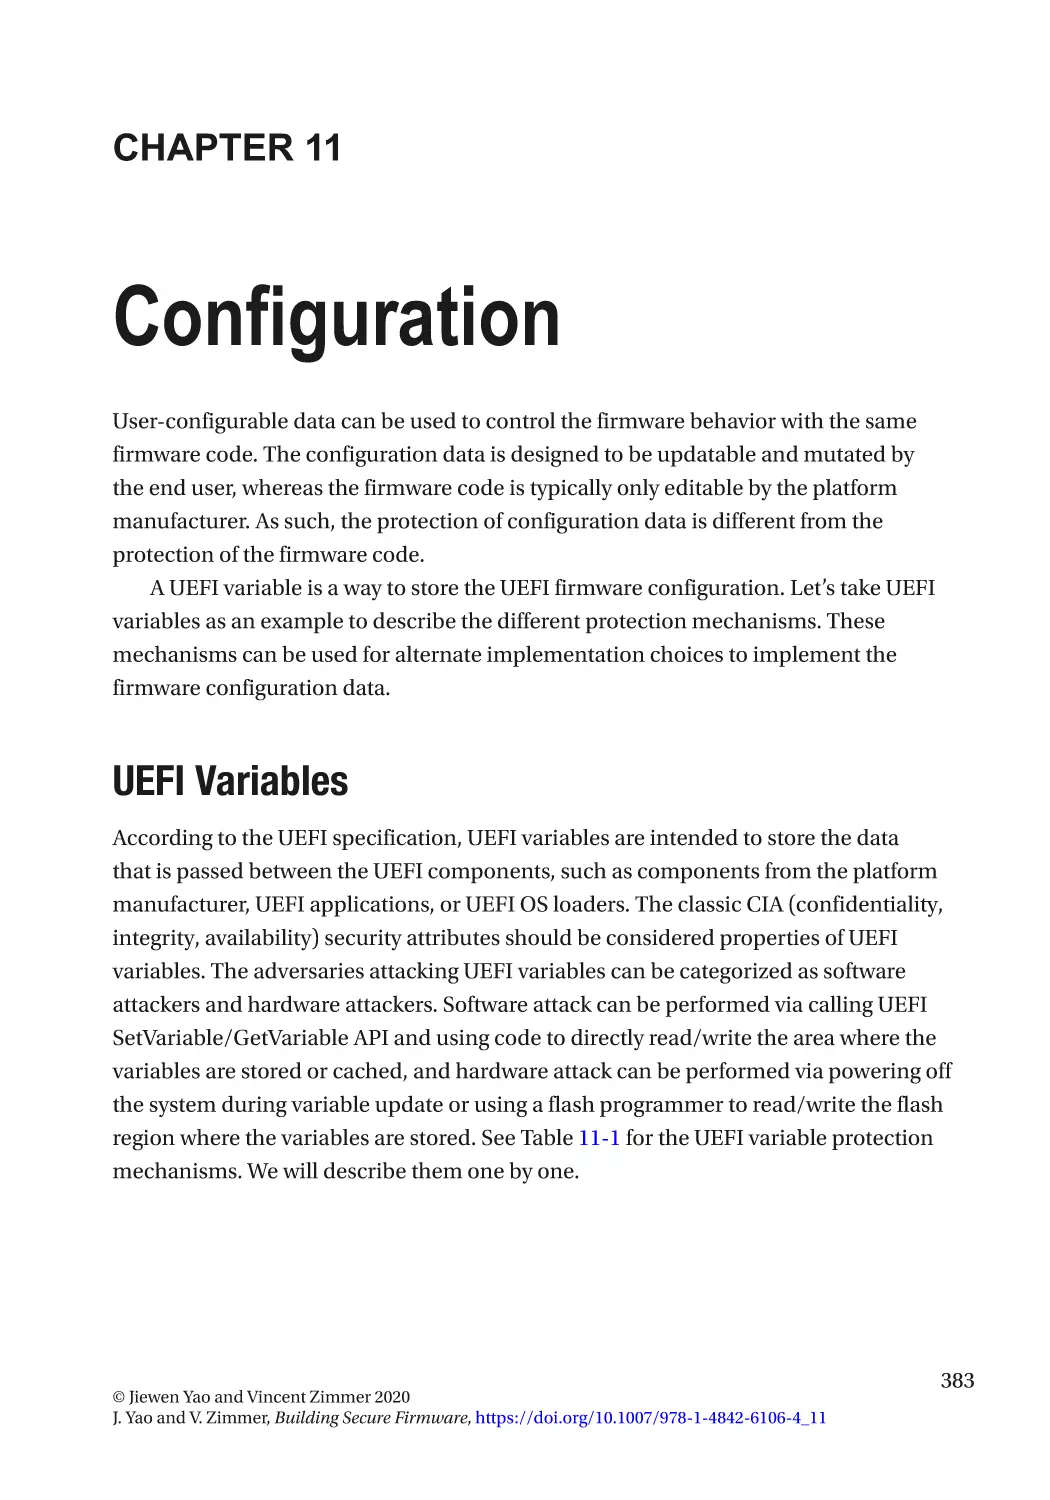 Chapter 11
UEFI Variables